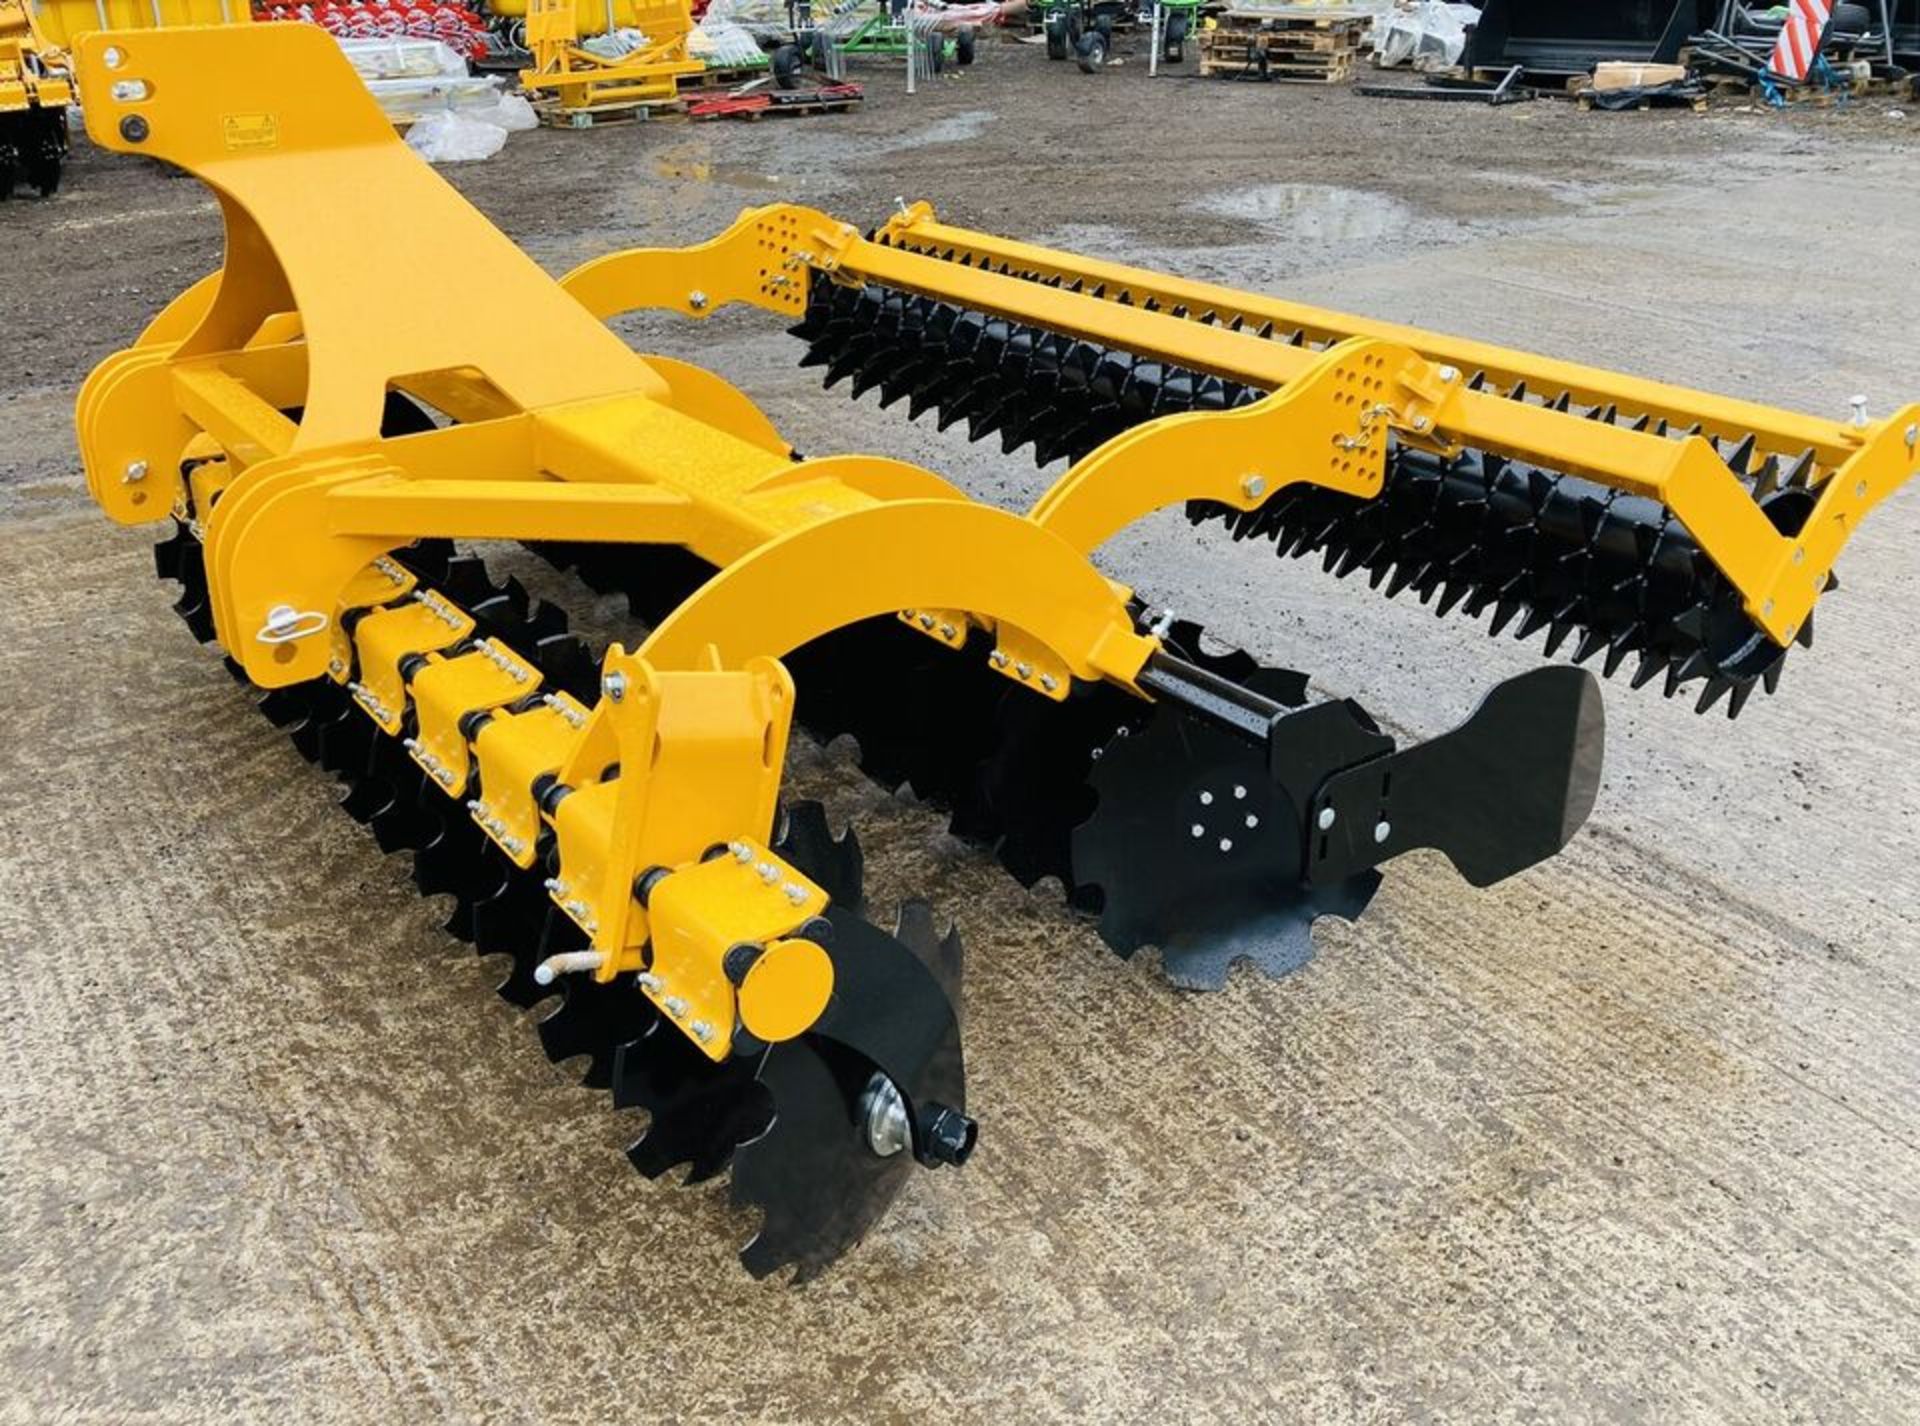 NEW 3M STALTECH DISC HARROWS500M ADJUSTABLE PACKER ROLLER WITH SCRAPERS - Image 8 of 15